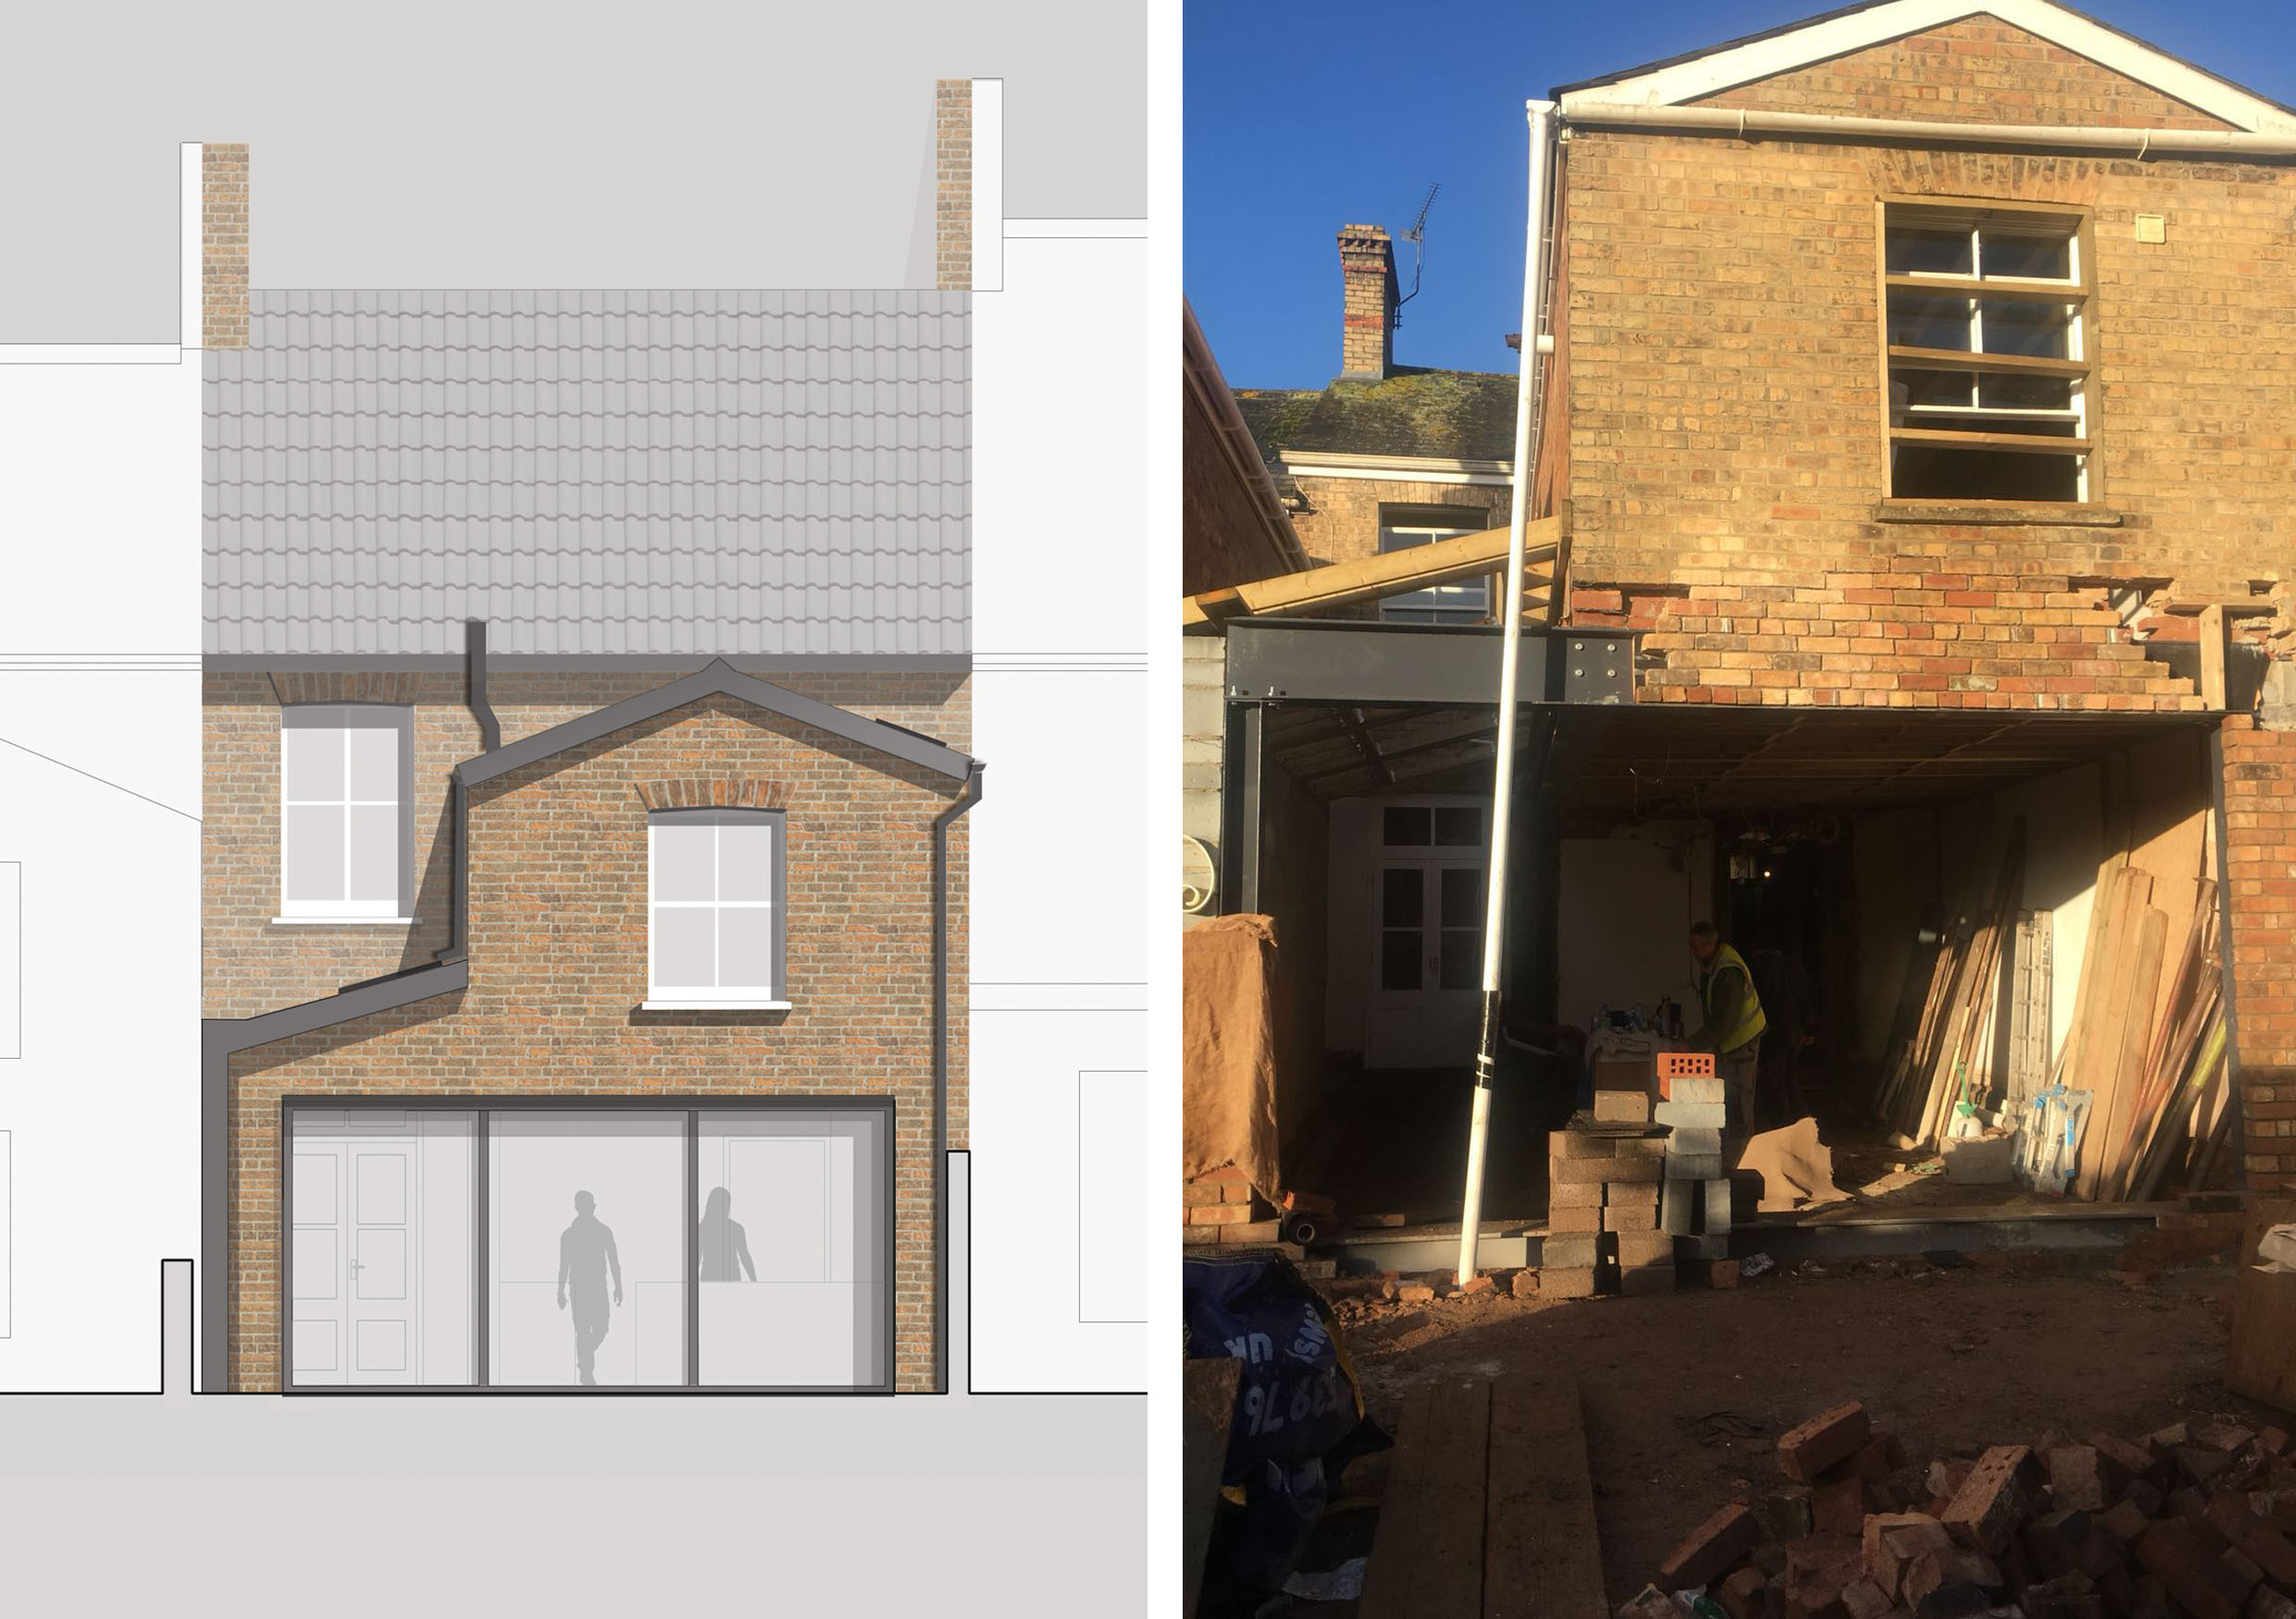 Consists of two images. The left an initial visualisation of the the rear elevation, highlighting the large picture window doors and the profile of the single story side extension. The right image is a onsite progress image showing the form of the extension taking shape.